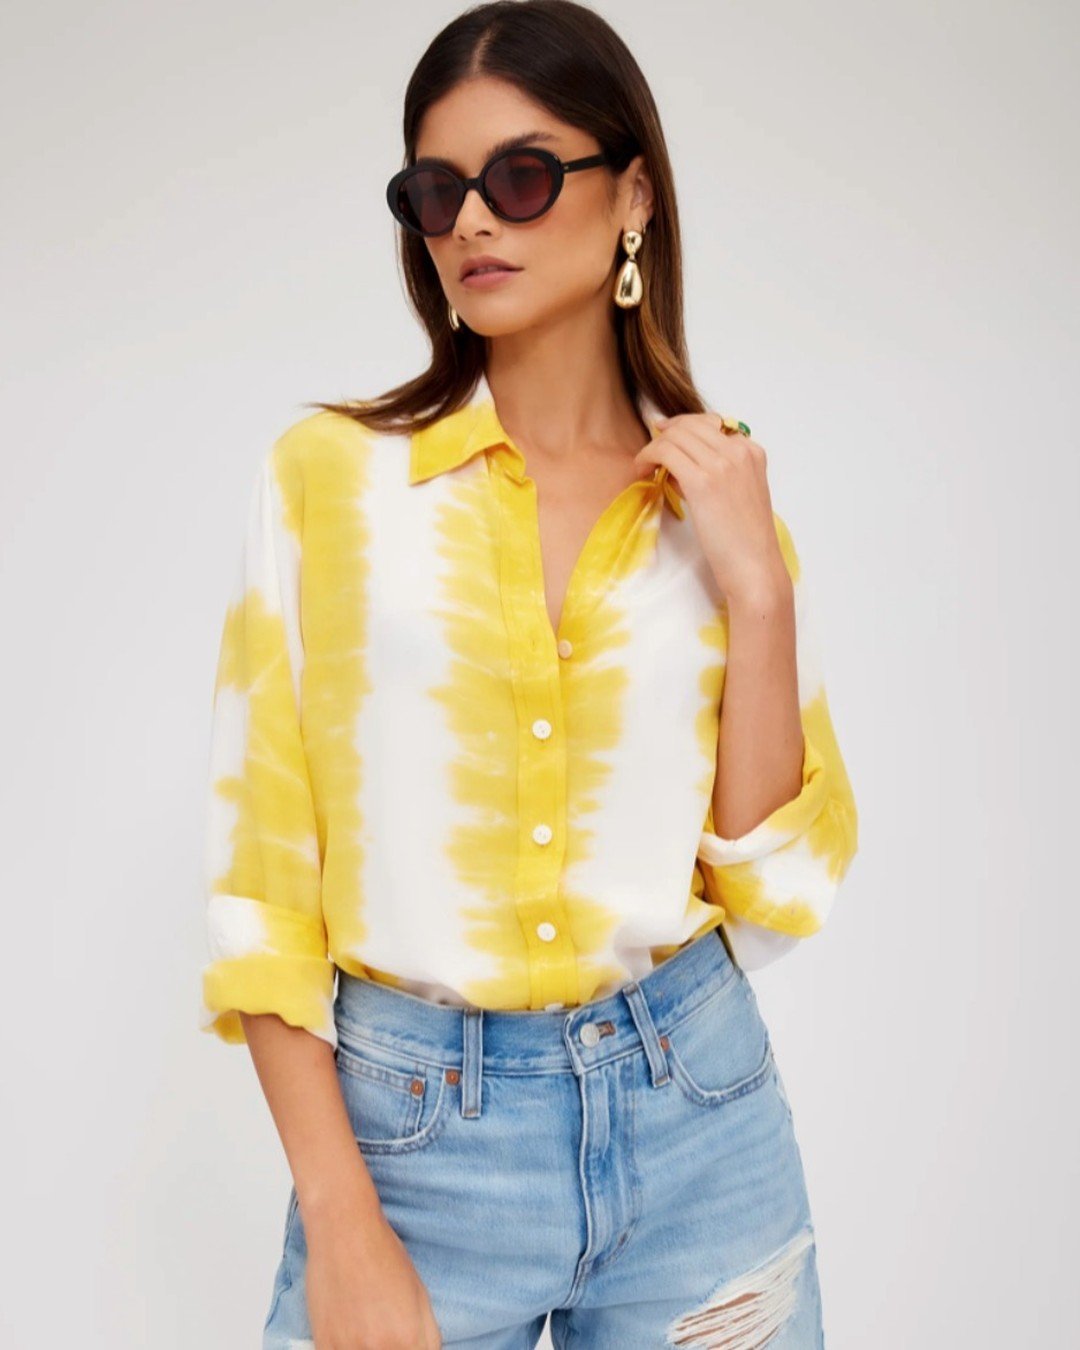 #RozSays we need to let the sunshine in! This silk button-down shirt from Fifteen Twenty gives off all the vibes for gorgous days ahead! 

OPEN TIL 9 PM TONGHT - STOP BY - lots of fun uptown! 

#seeyouatcoco #cocoanexperience #206bellevueavenue #uppe